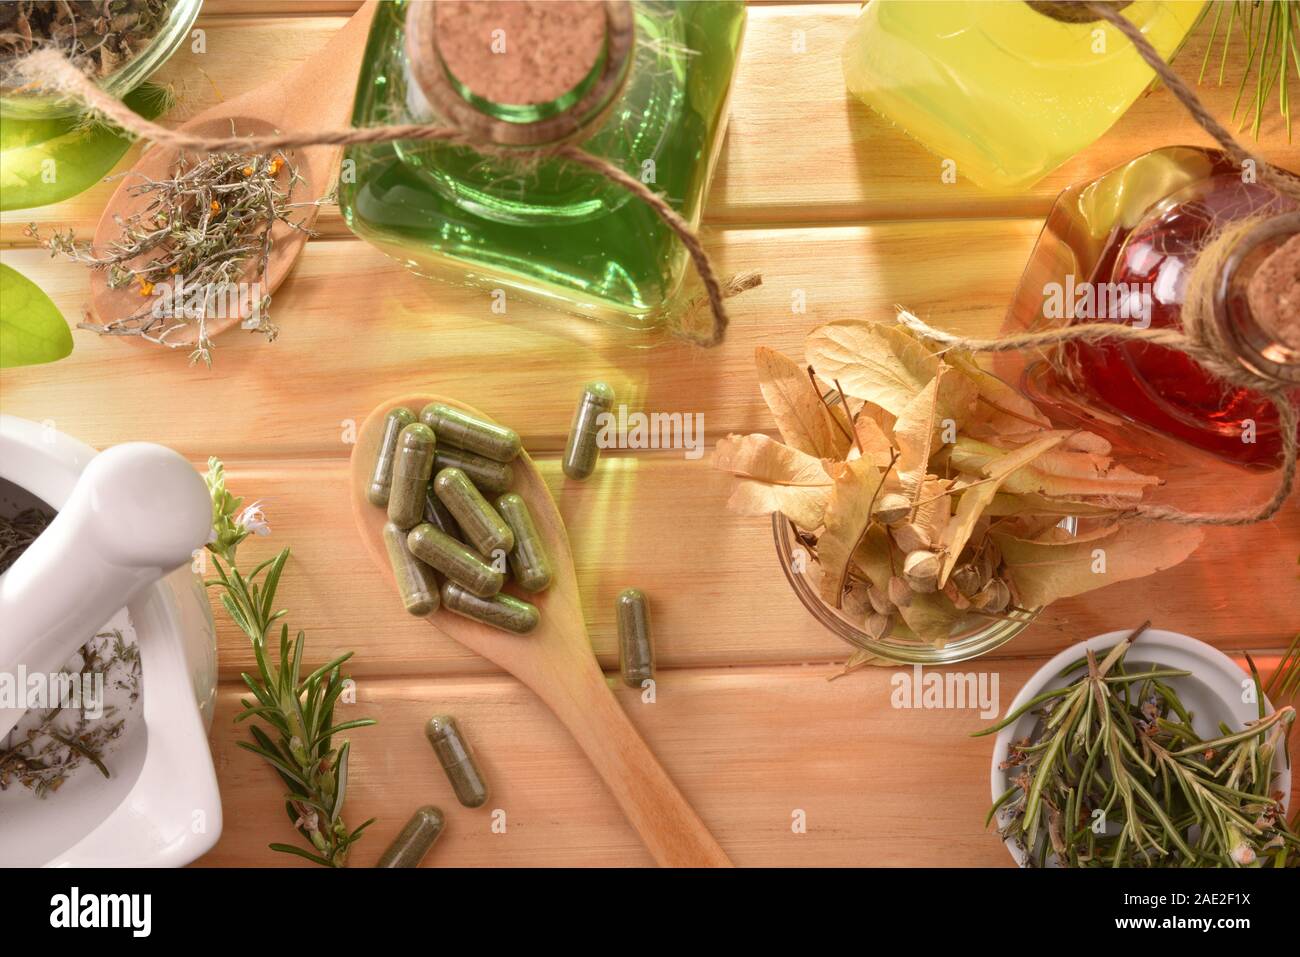 Capsules and bottles of essence of natural medicine with medicinal plants on wooden table detail. Top view. Horizontal composition. Stock Photo